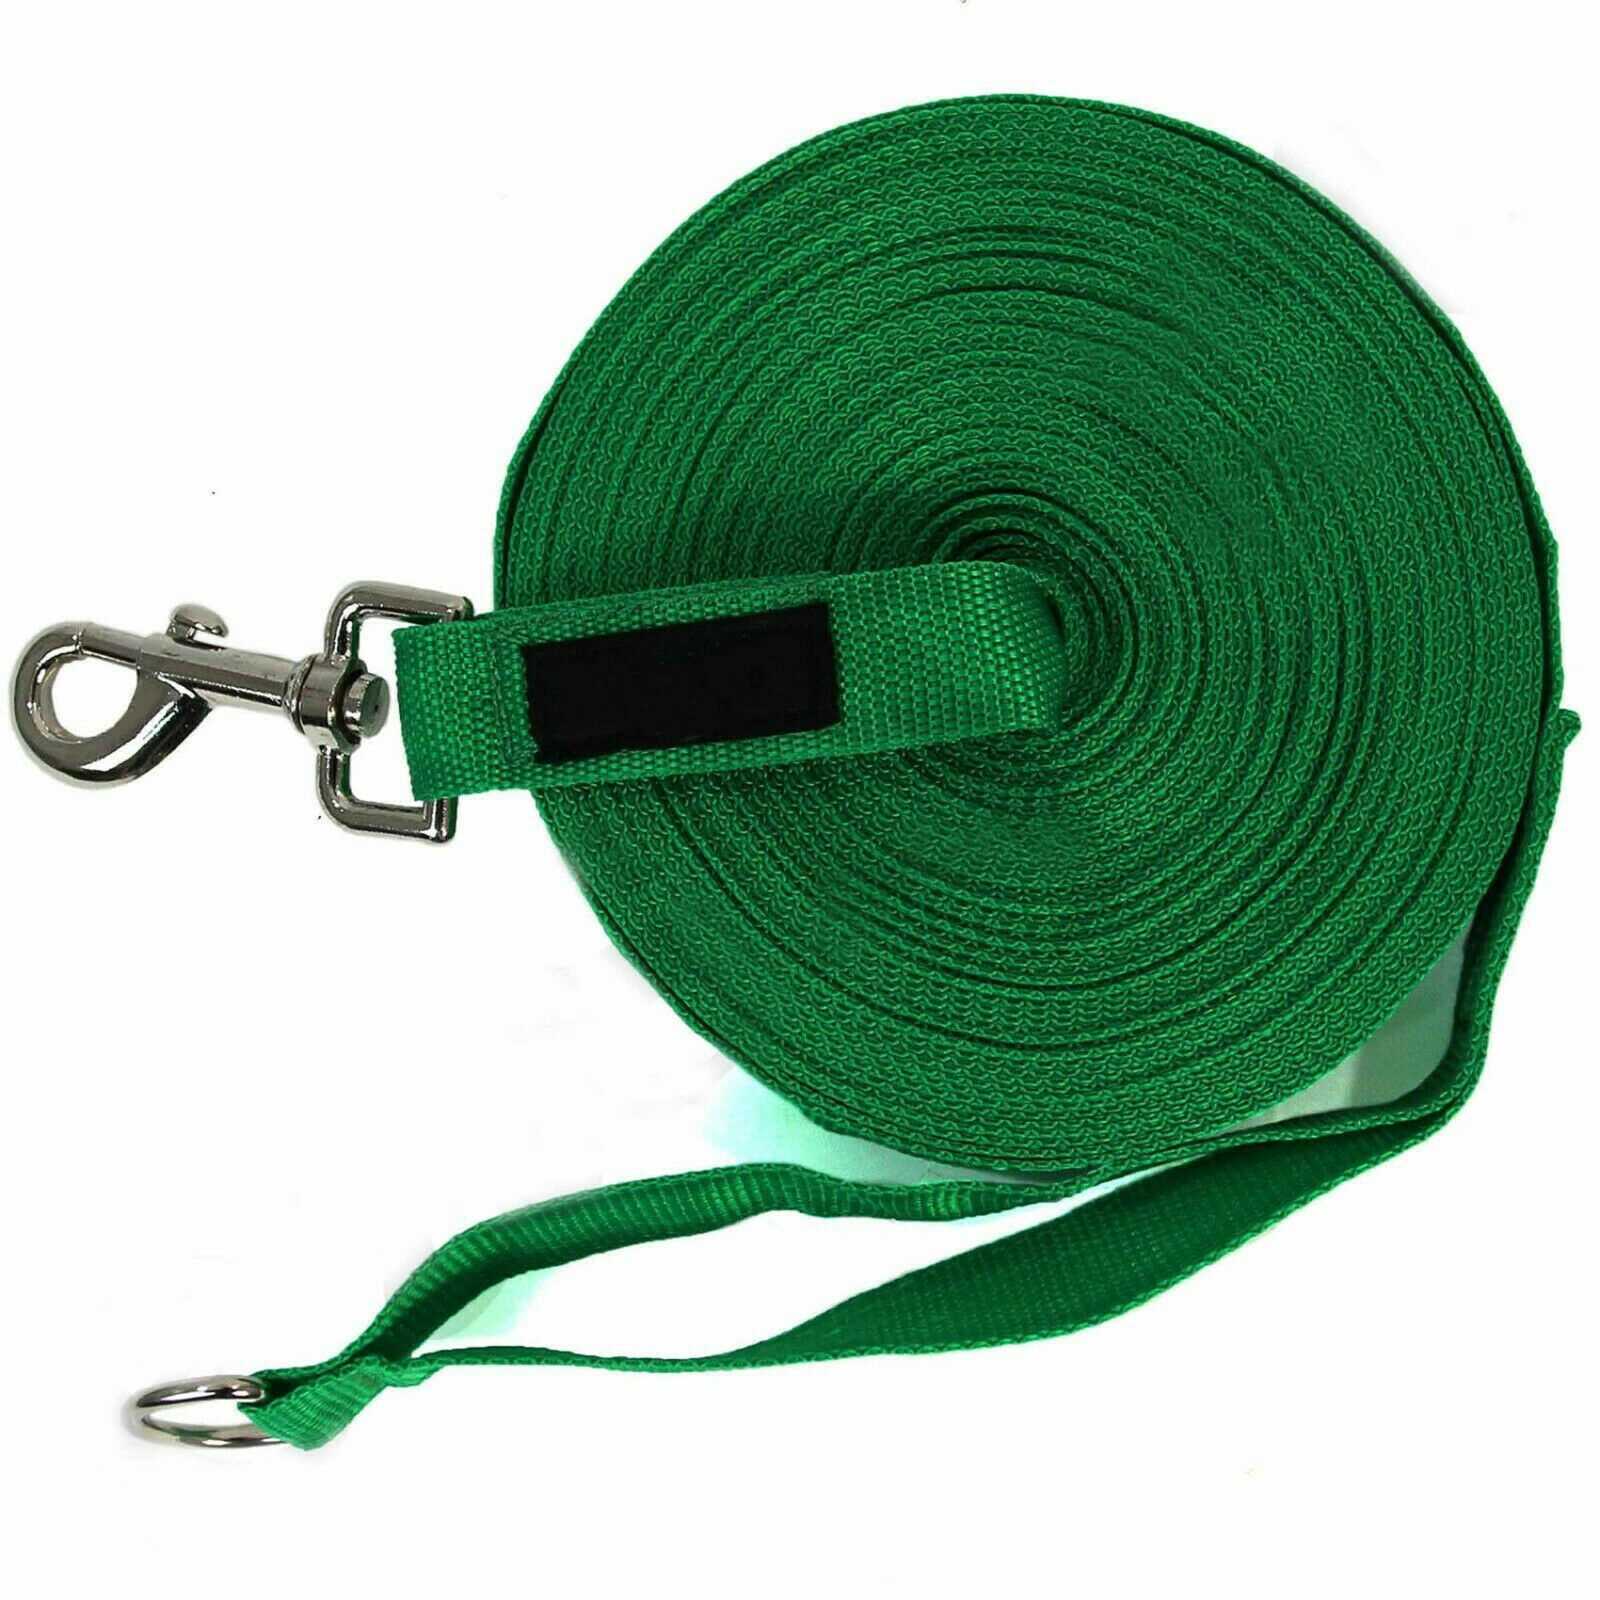 Green Dog Pet Puppy Training Lead Leash 50ft 15m Long Obedience Recall 1 Inch Wide